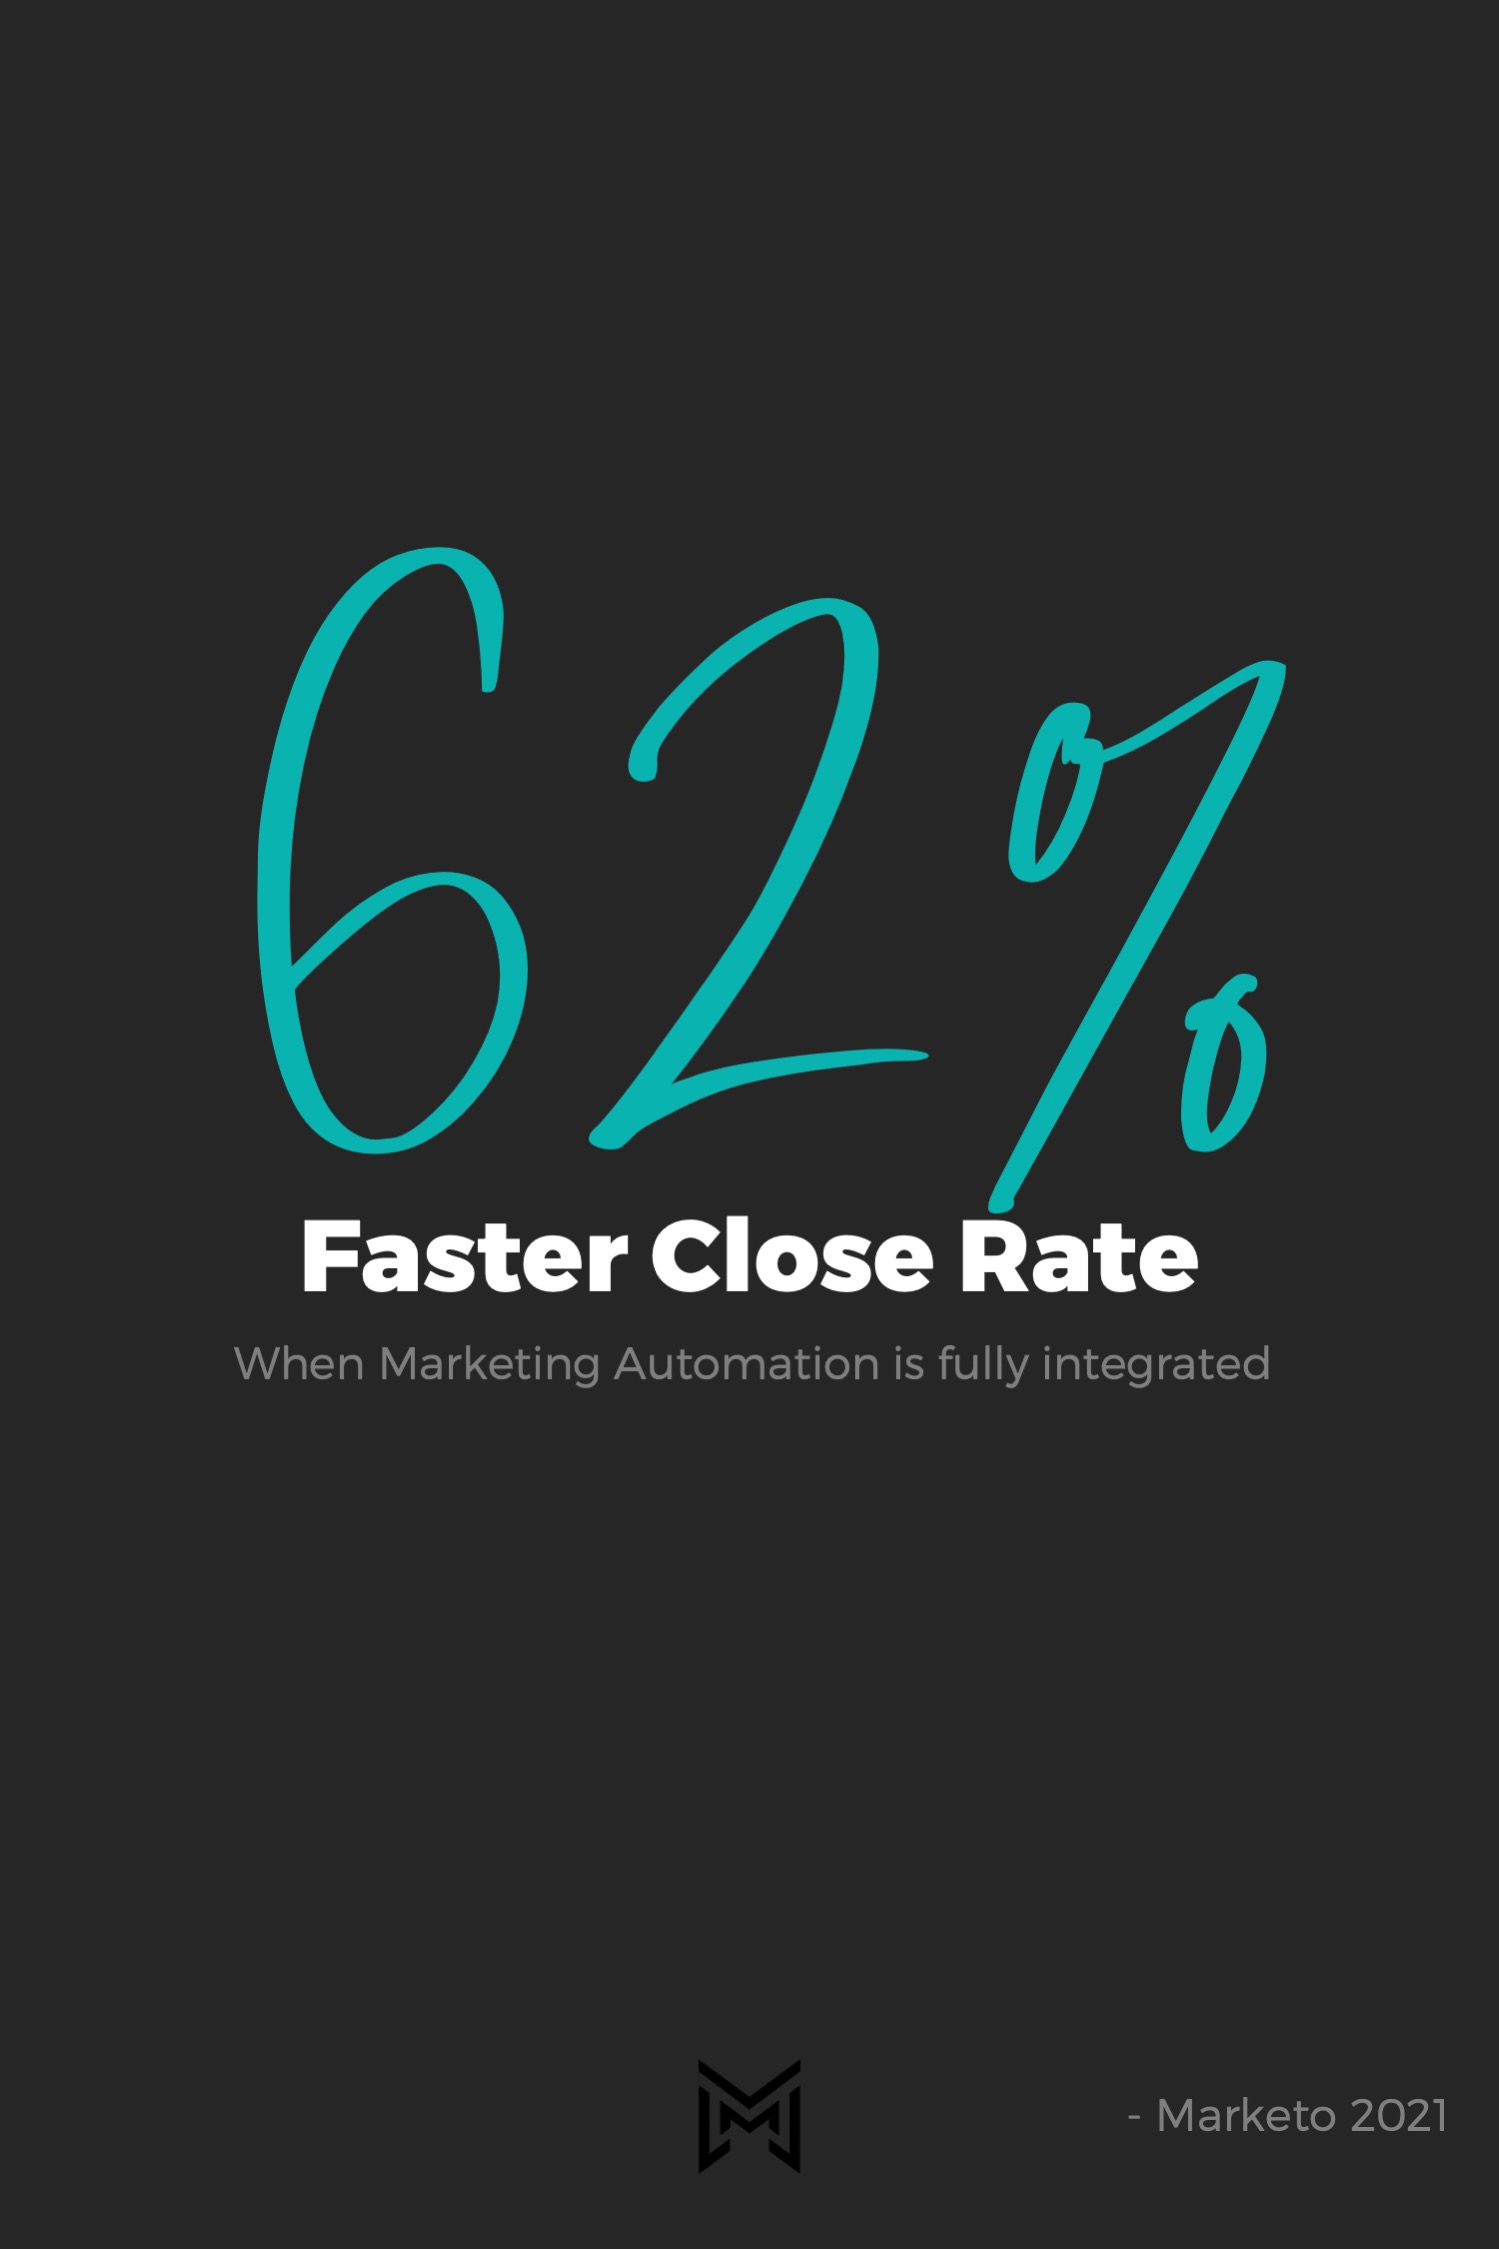 Marketing Stat - 62% Faster Close Rate with Marketing Automation